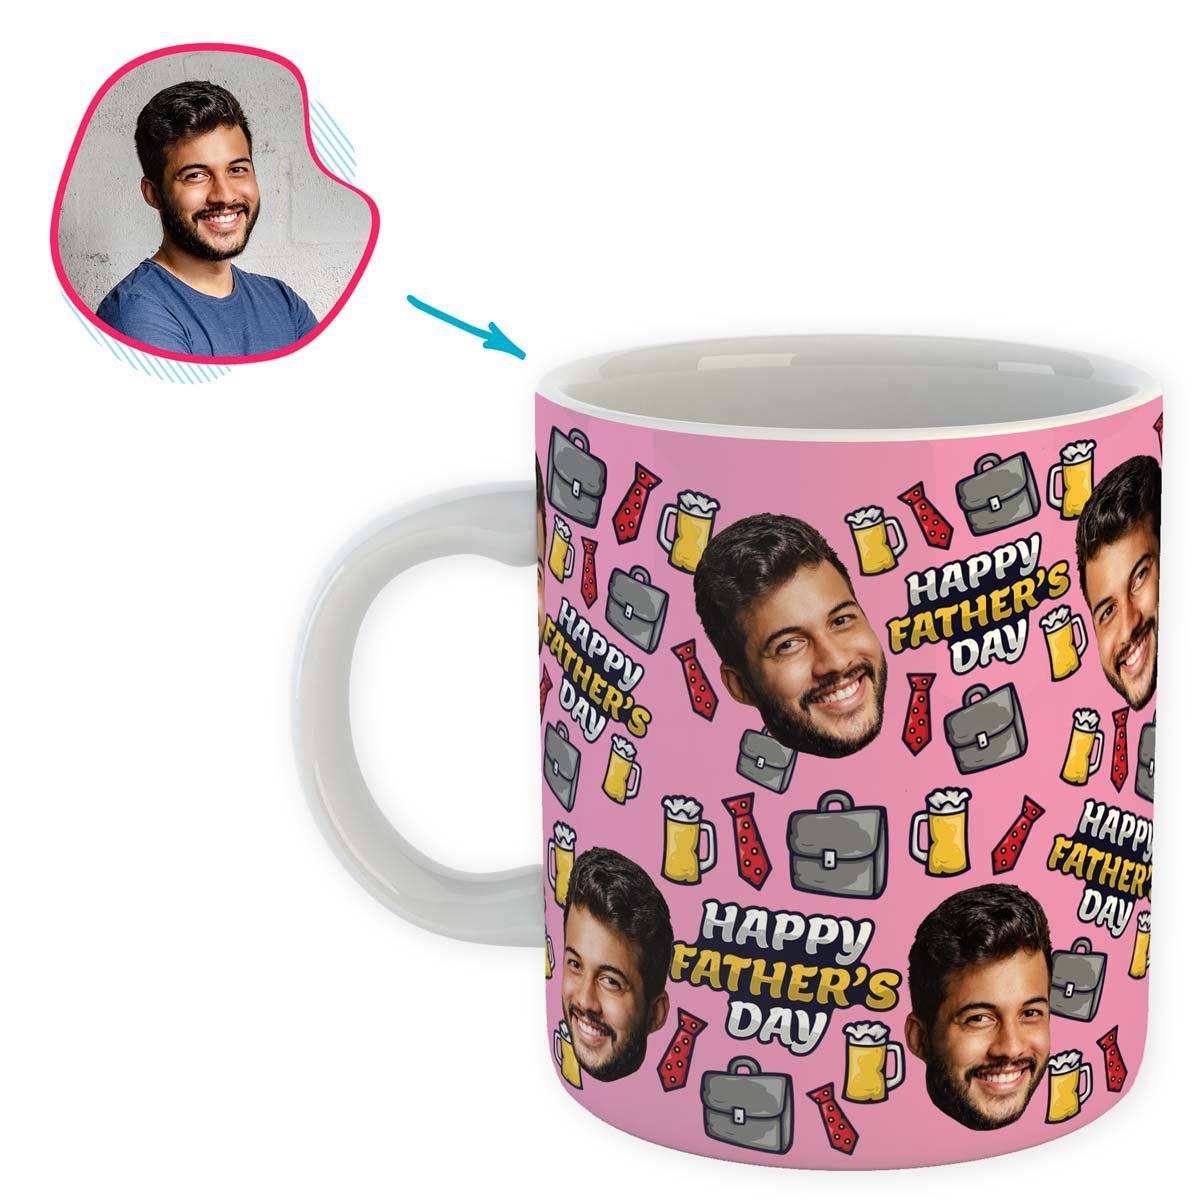 Pink Fathers Day personalized mug with photo of face printed on it